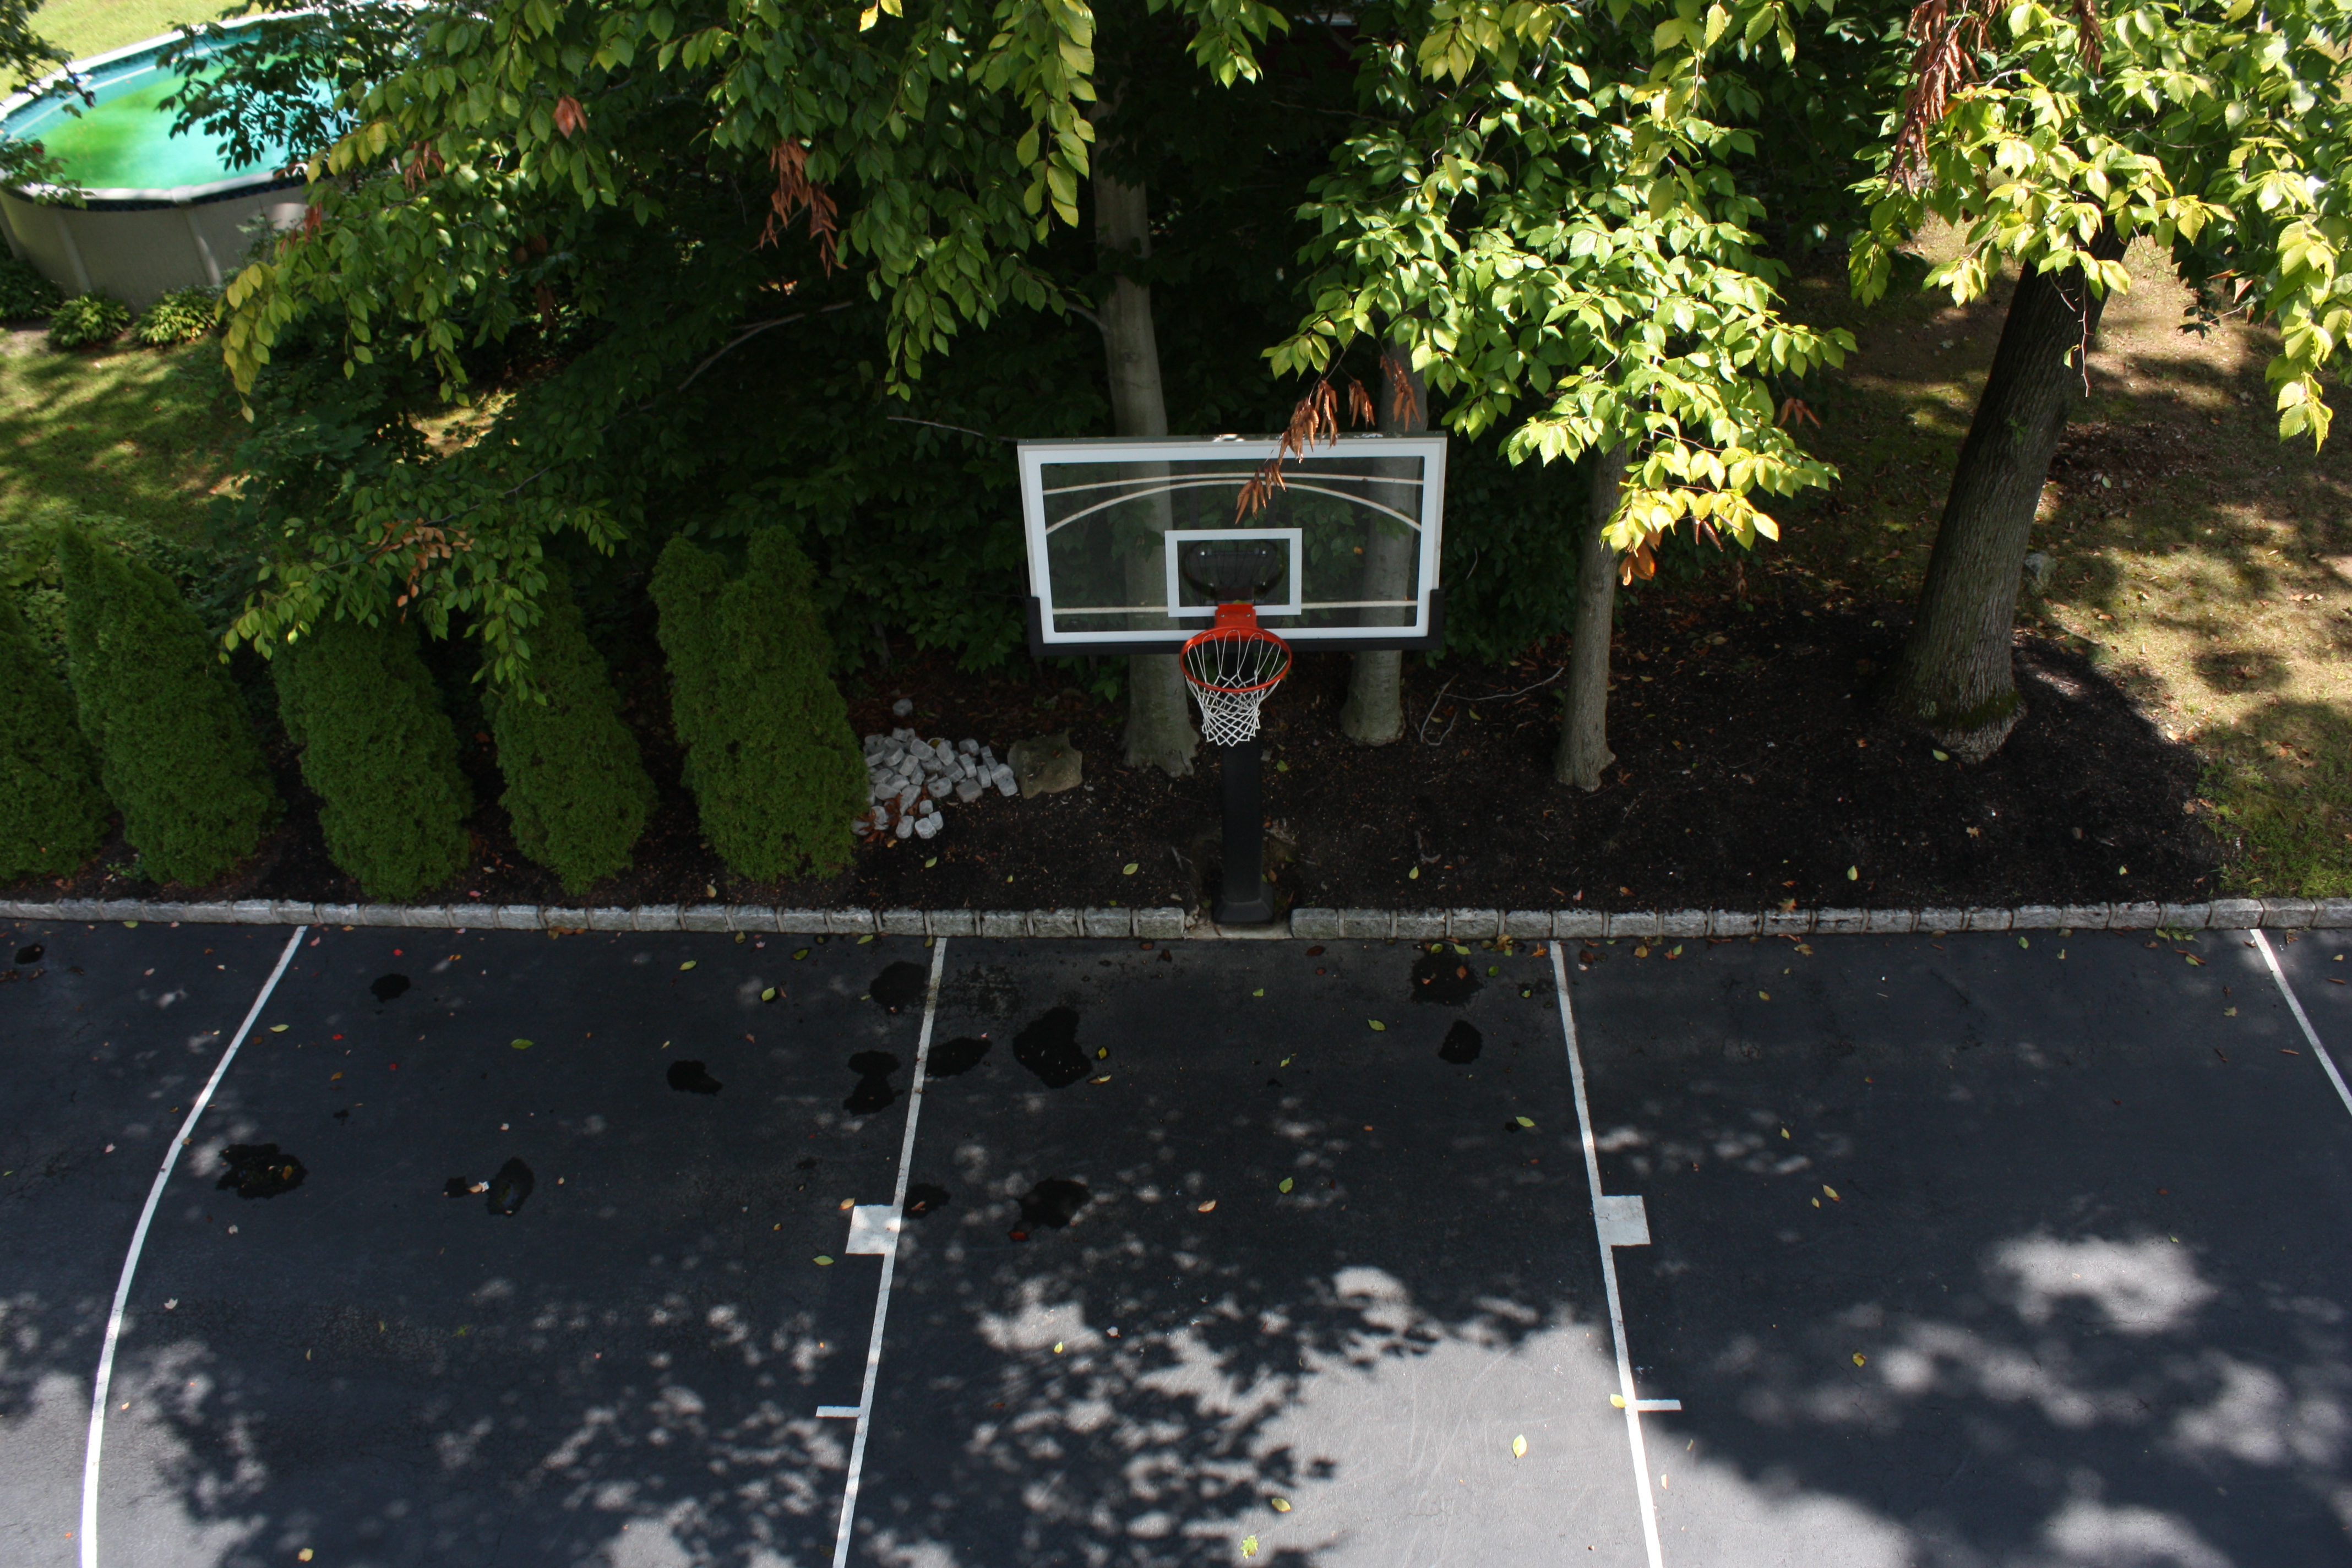 A very unique perspective on this parking lot basketball court.  The Pro Dunk Platinum basketball system sits right behind a line of pavers adding a nice trim to the asphalt court.